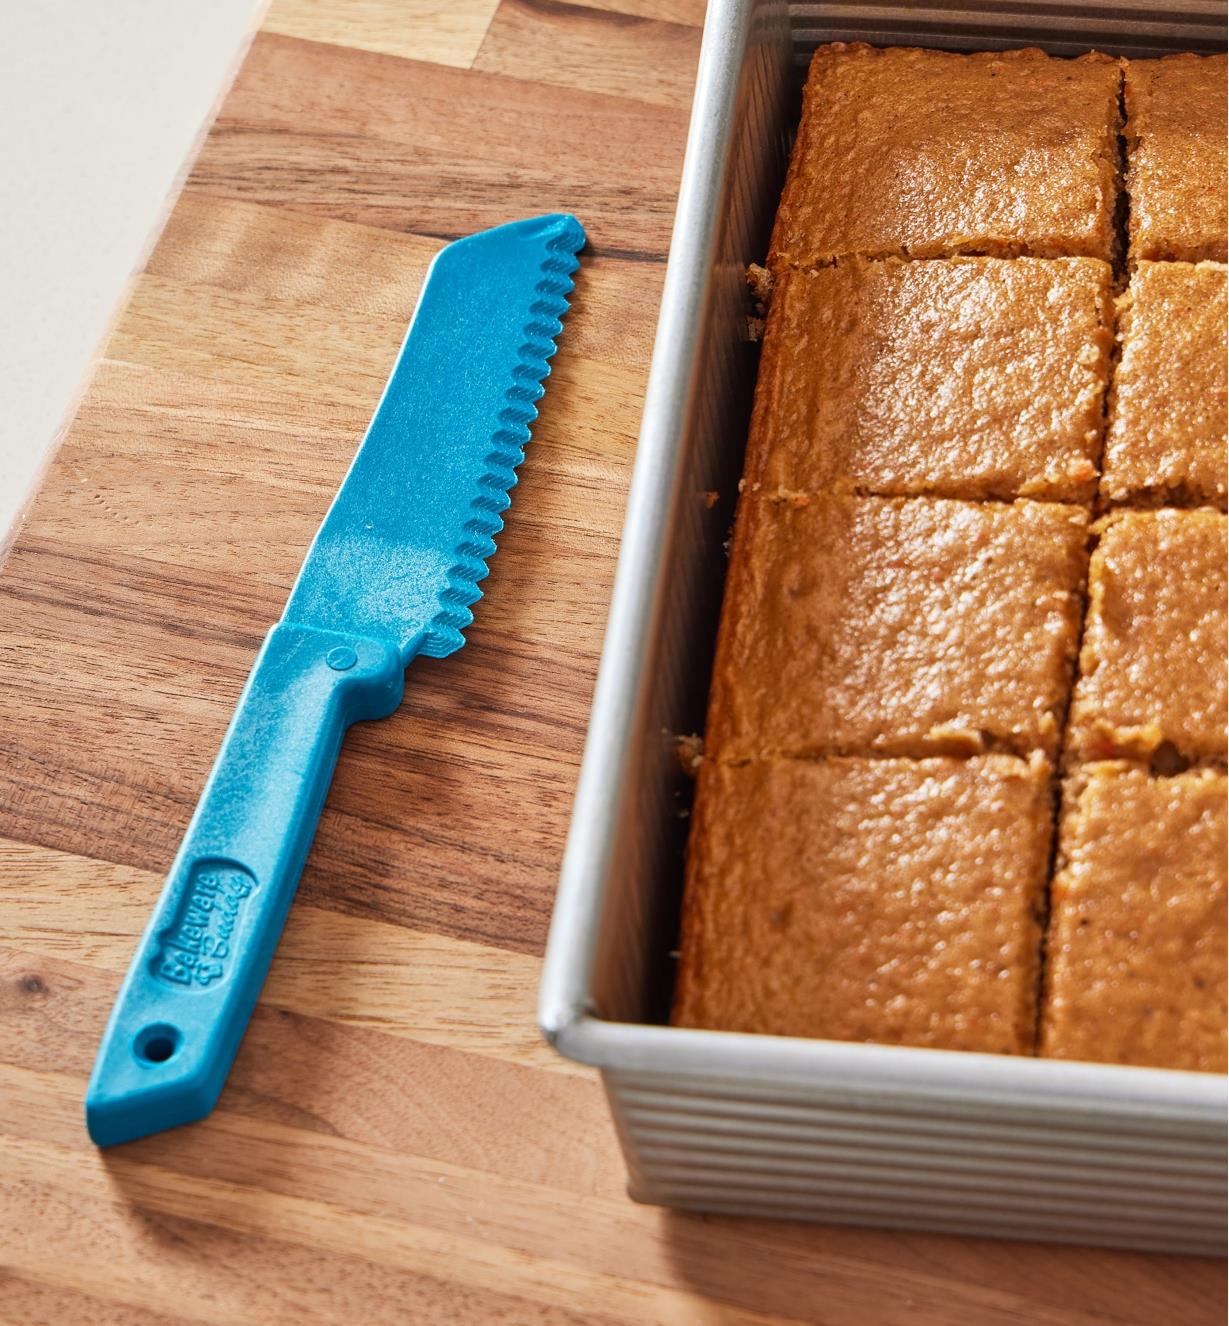 The bakeware buddy knife resting beside a cake cut in portions in a non-stick pan